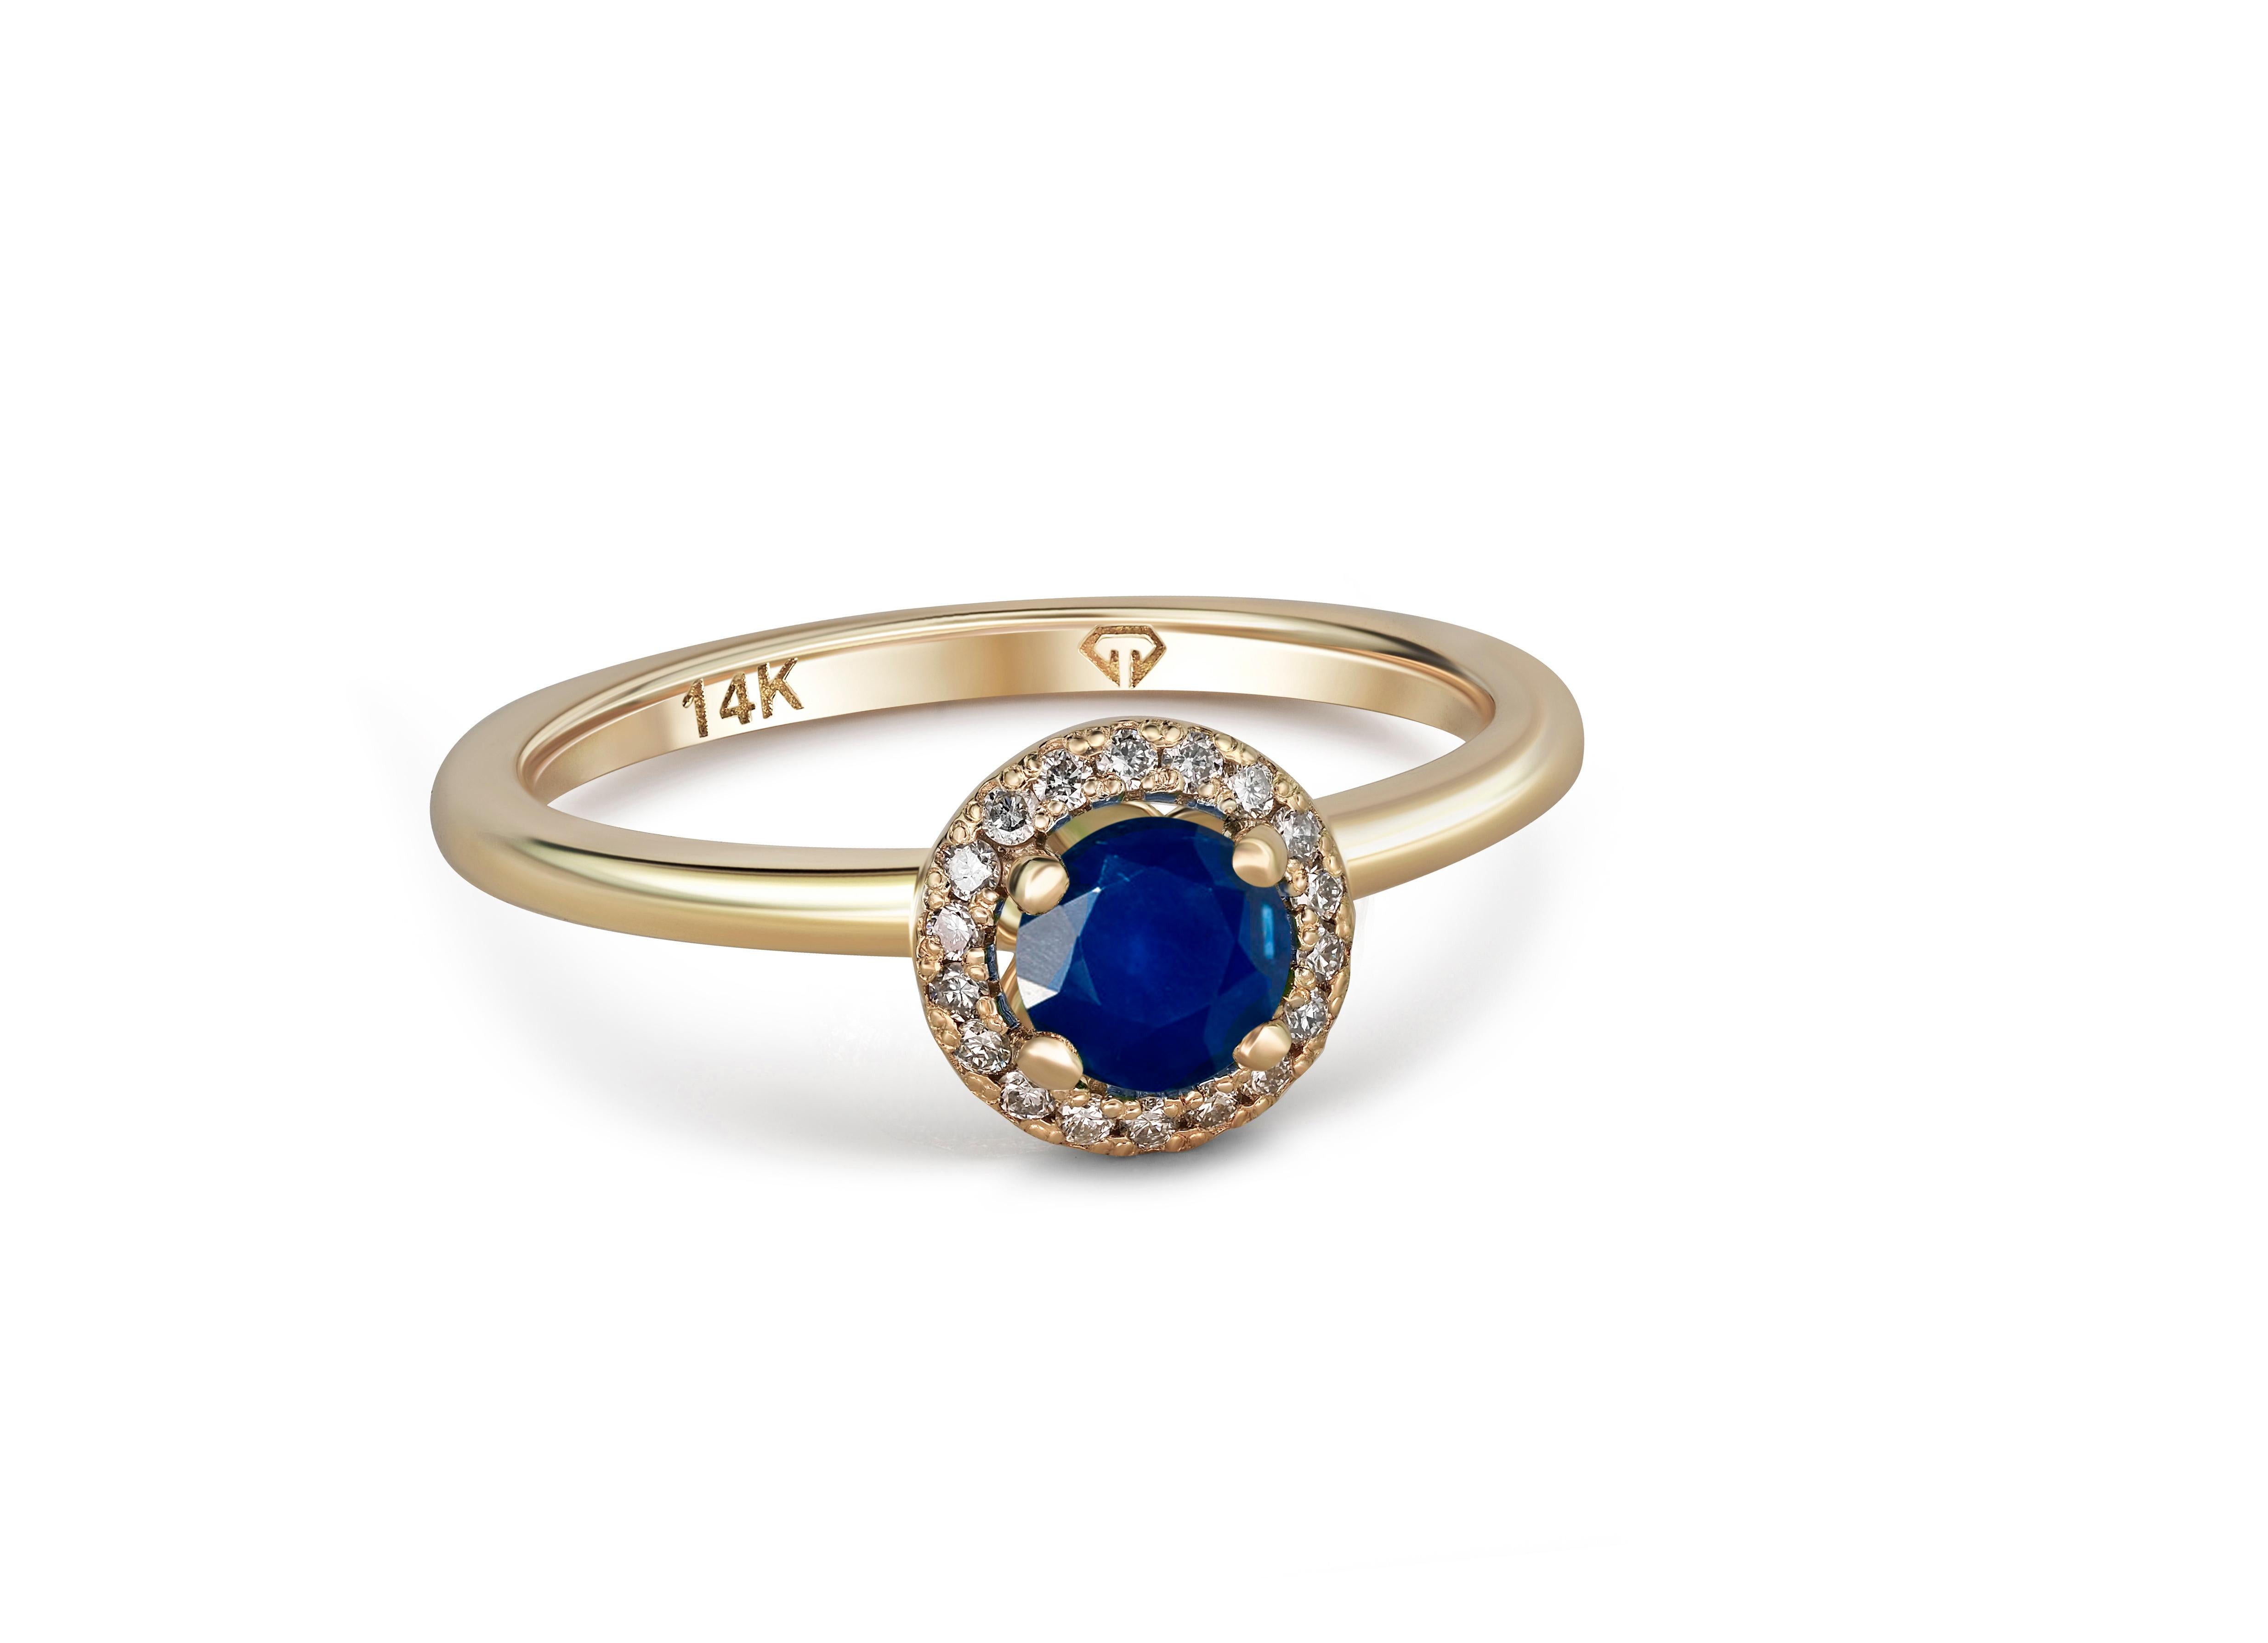 Women's Halo Sapphire Ring with Diamonds in 14 Karat Gold.  For Sale